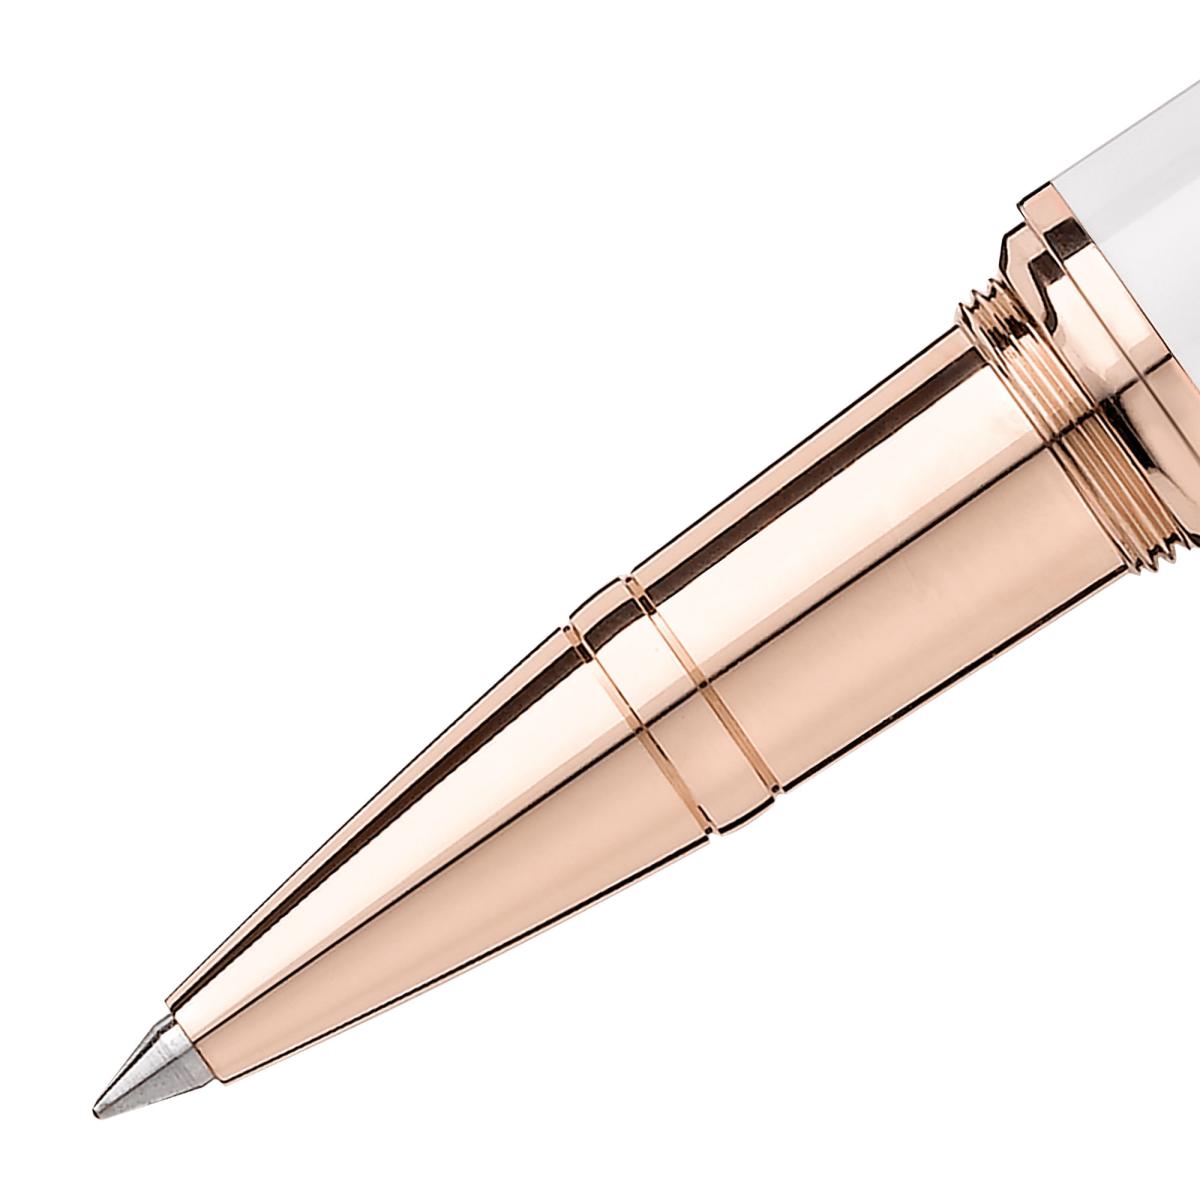 Muses Marilyn Monroe Special Edition 'Pearl' Rollerball von Montblanc (Ref. 117885)